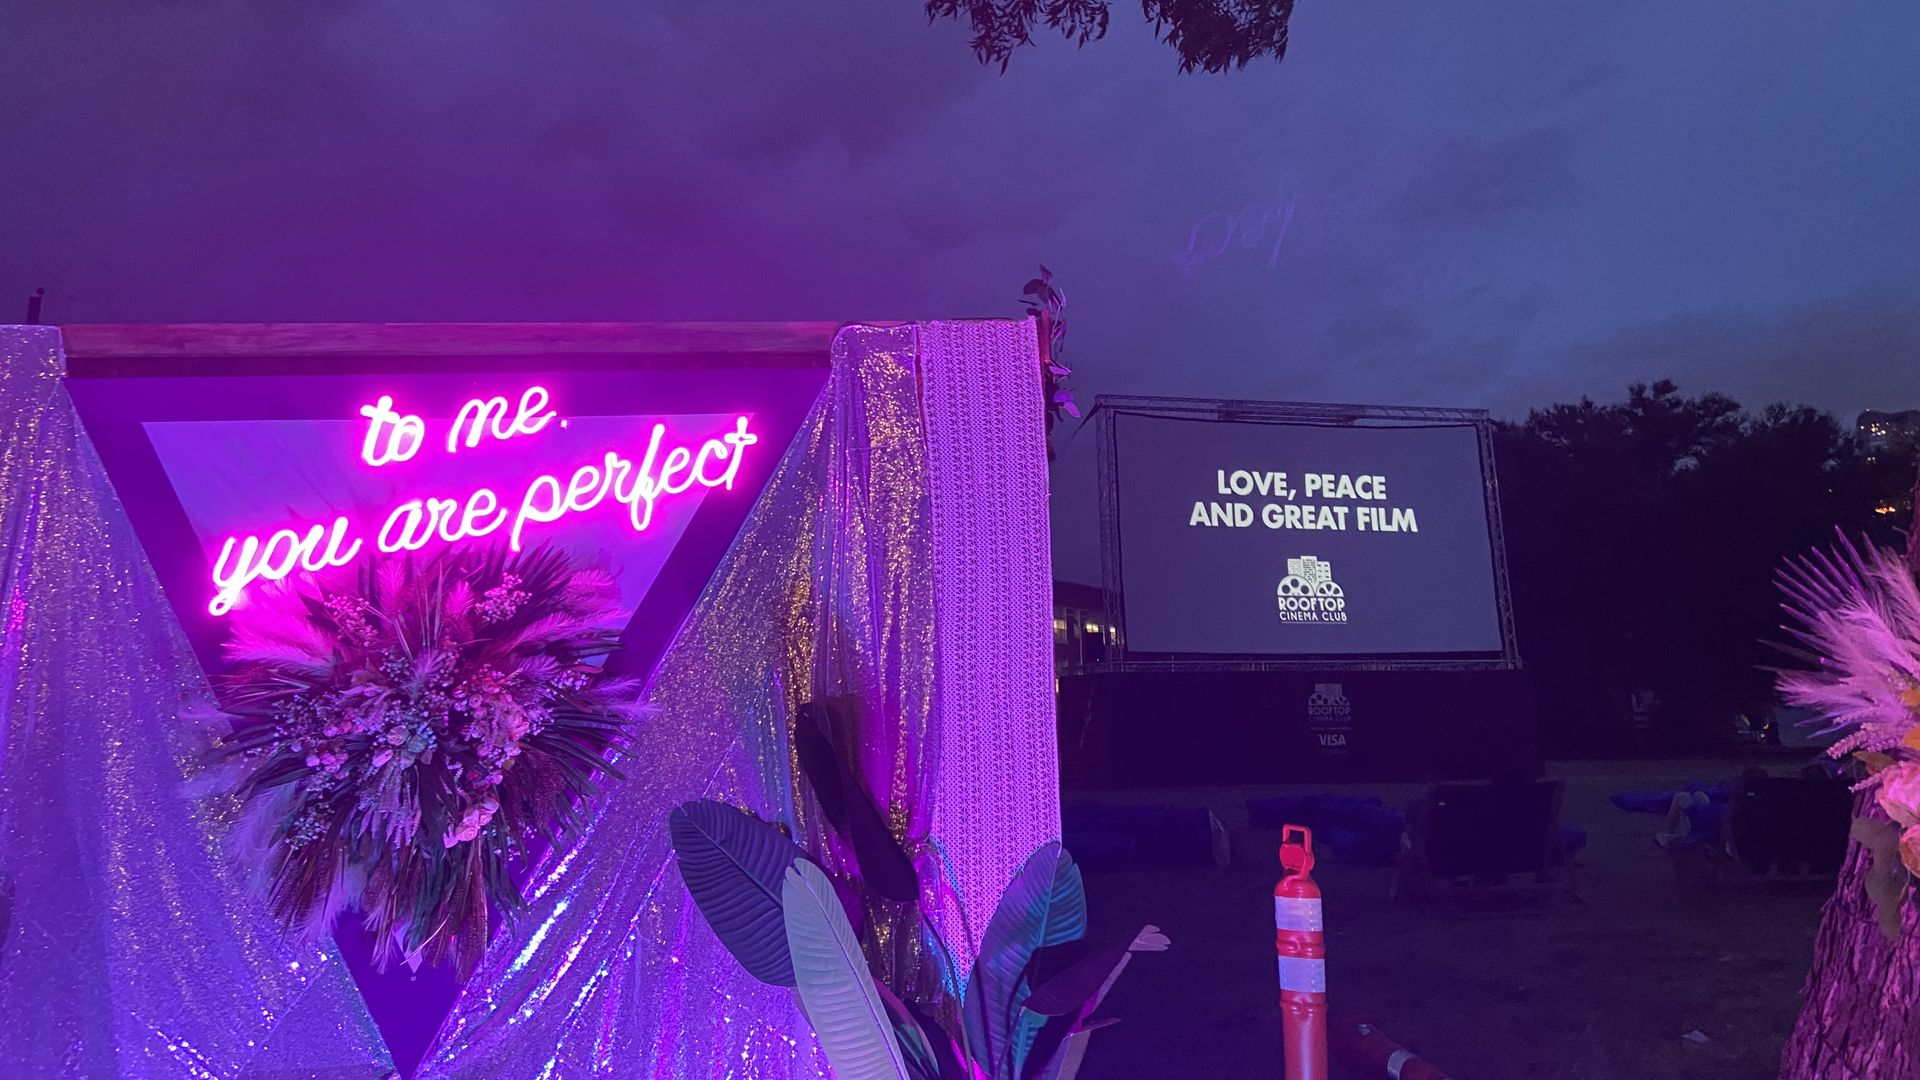 A neon sign that reads "to me you are perfect" against the night sky.